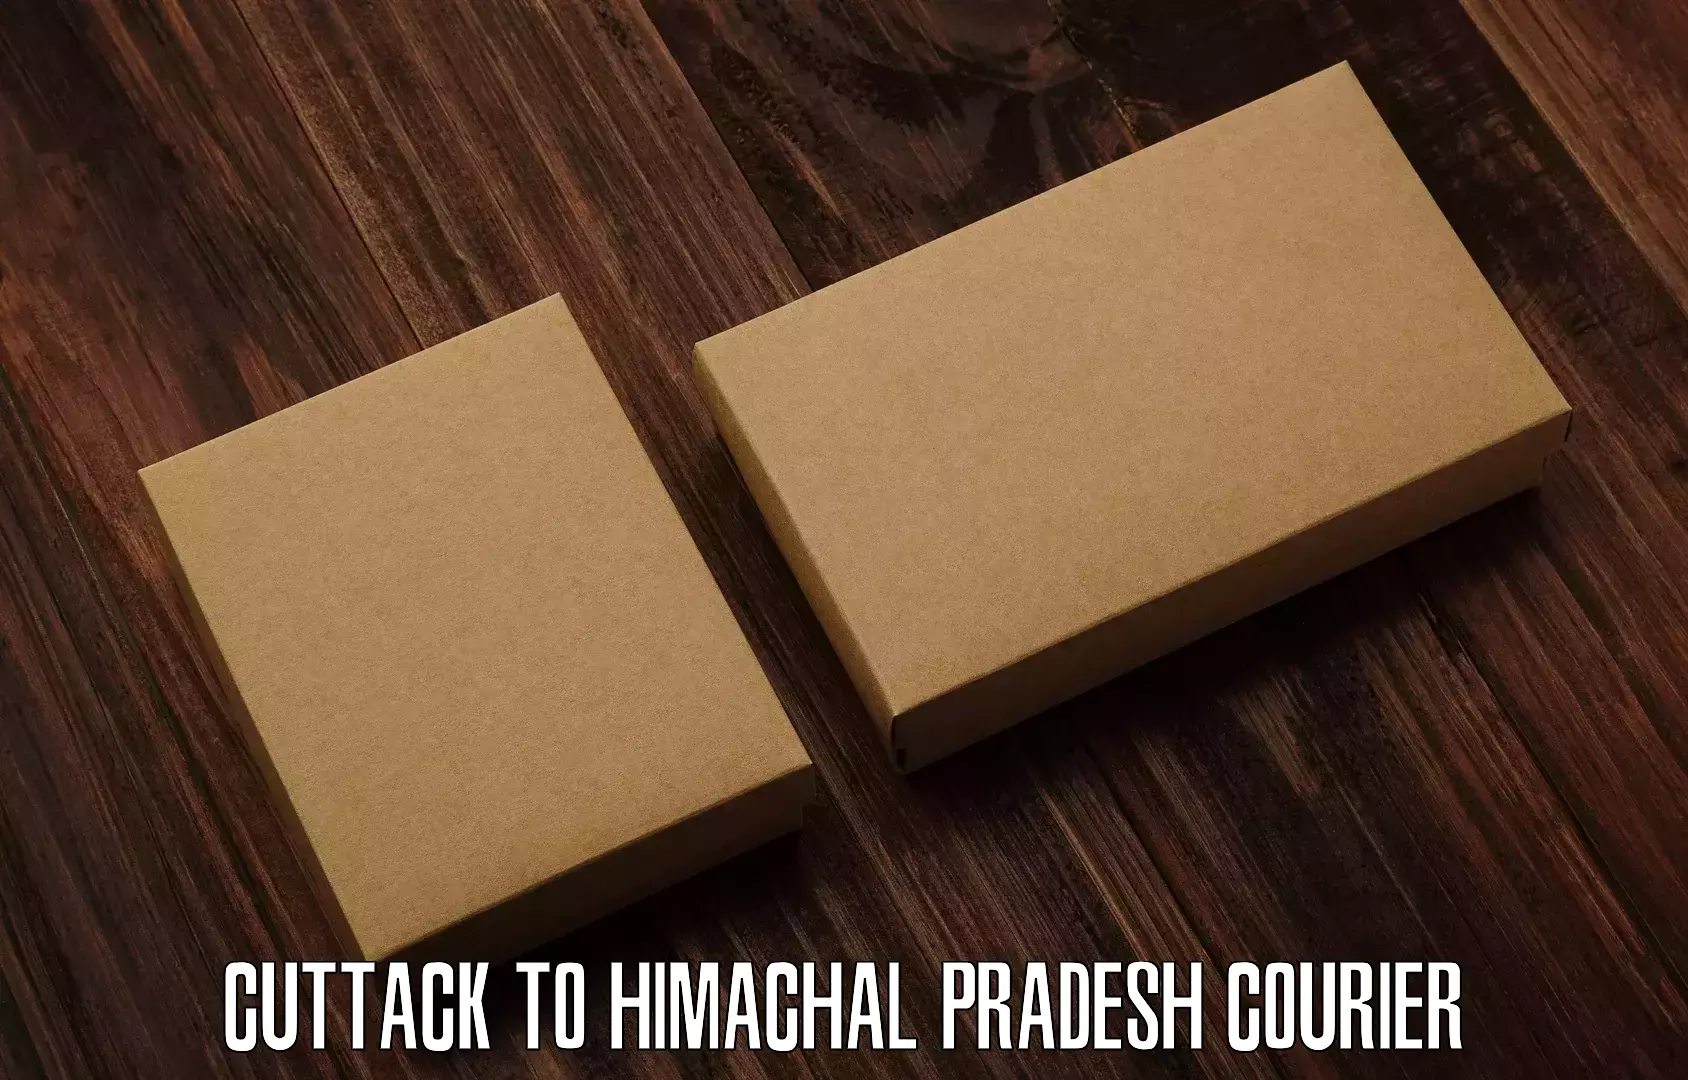 24-hour delivery options Cuttack to Himachal Pradesh